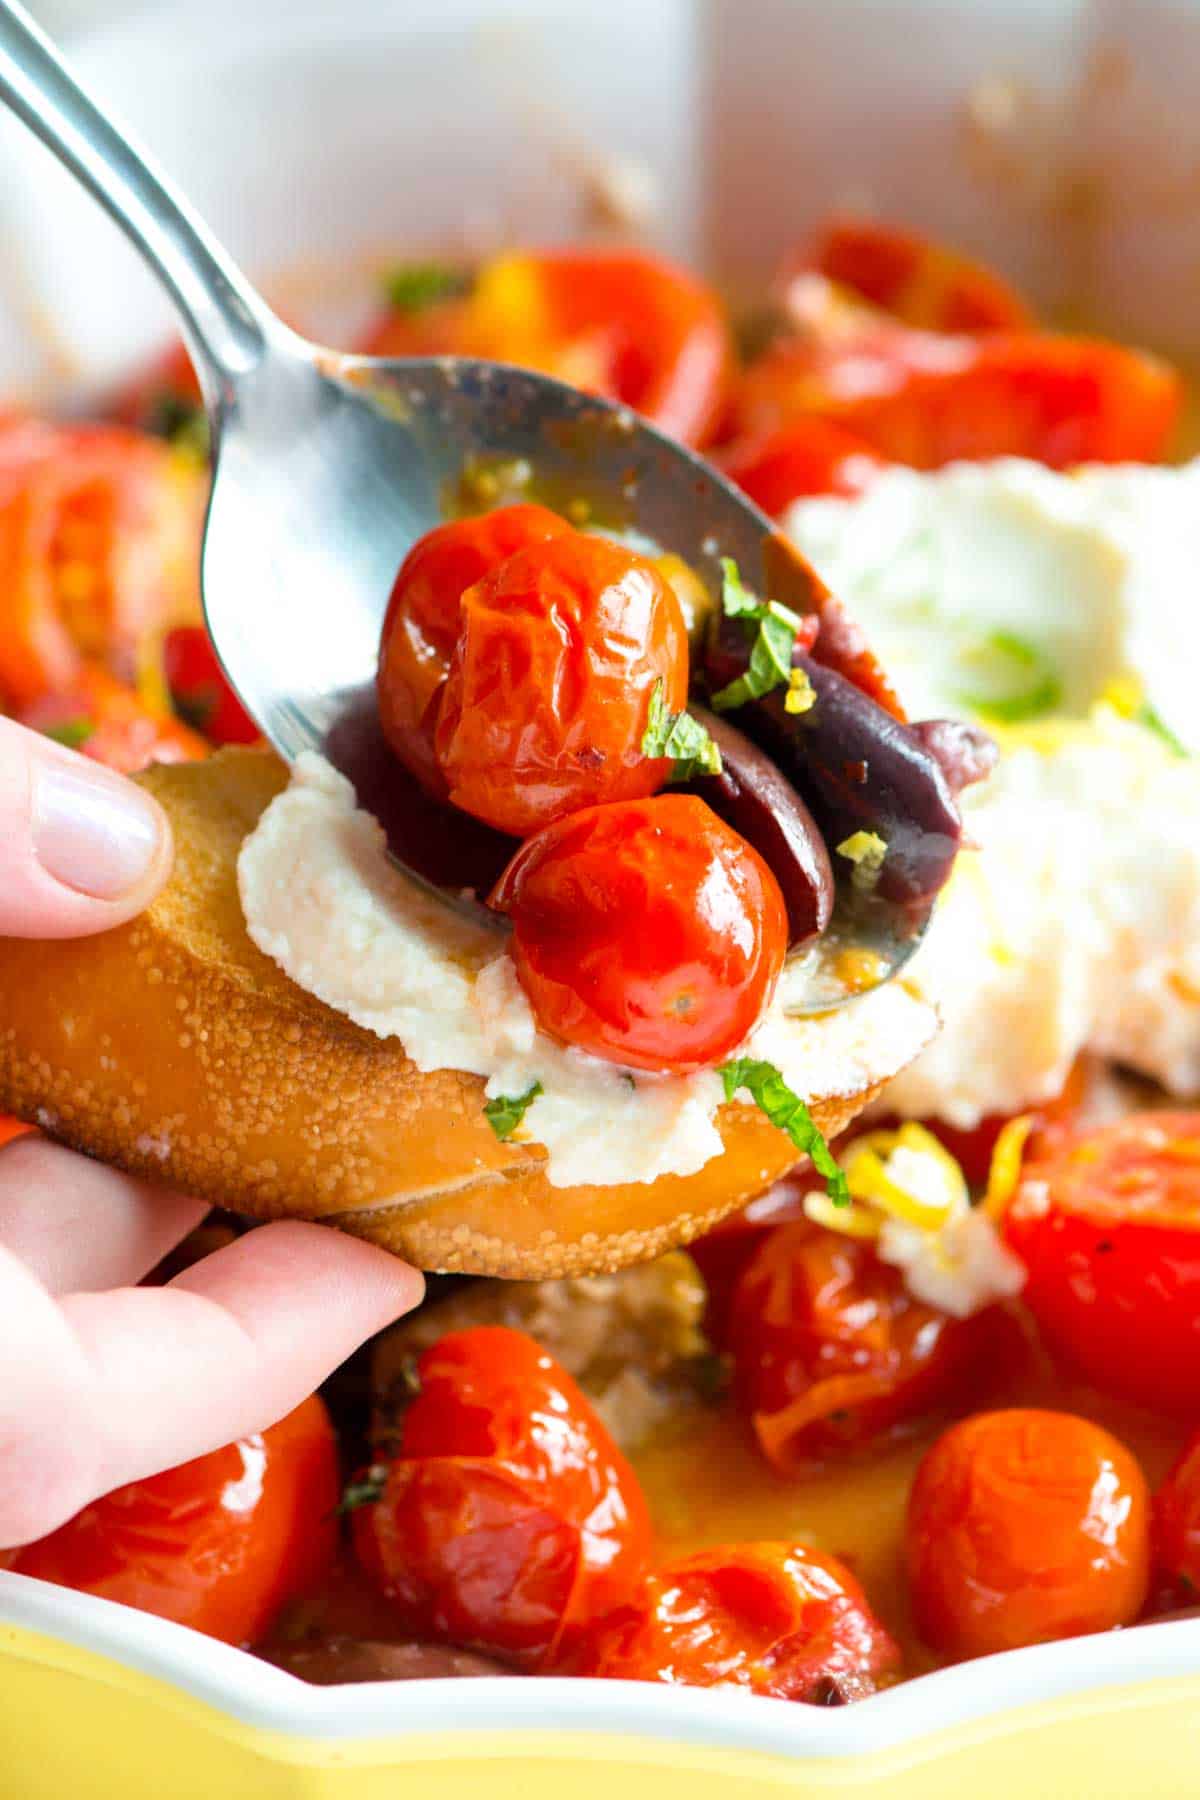 Perfectly Baked Tomatoes with Ricotta and Mint